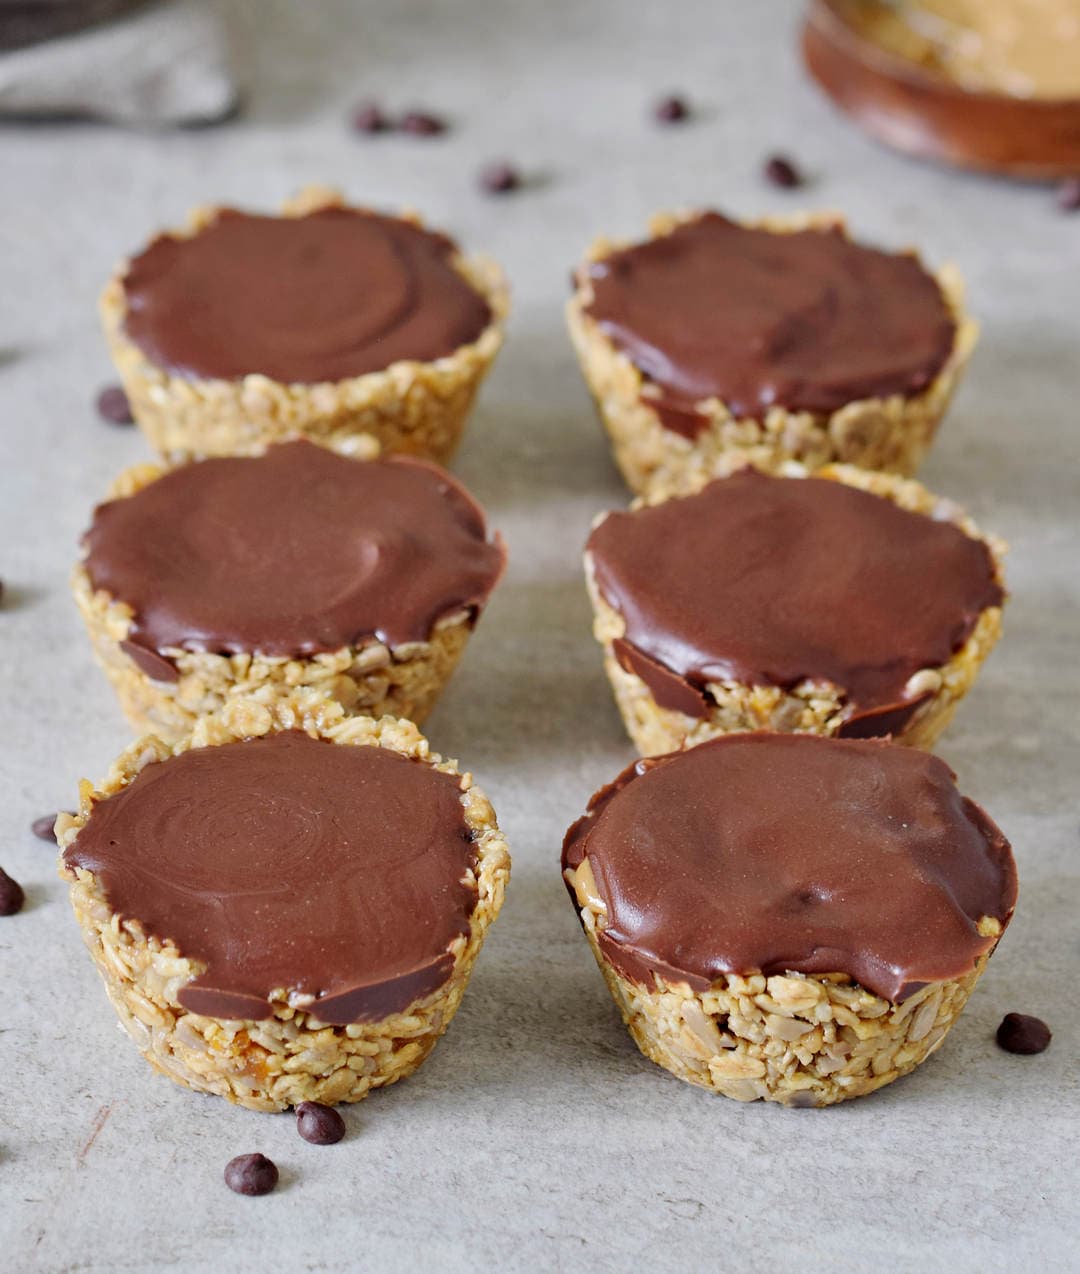 6 homemade muesli cups with chocolate topping